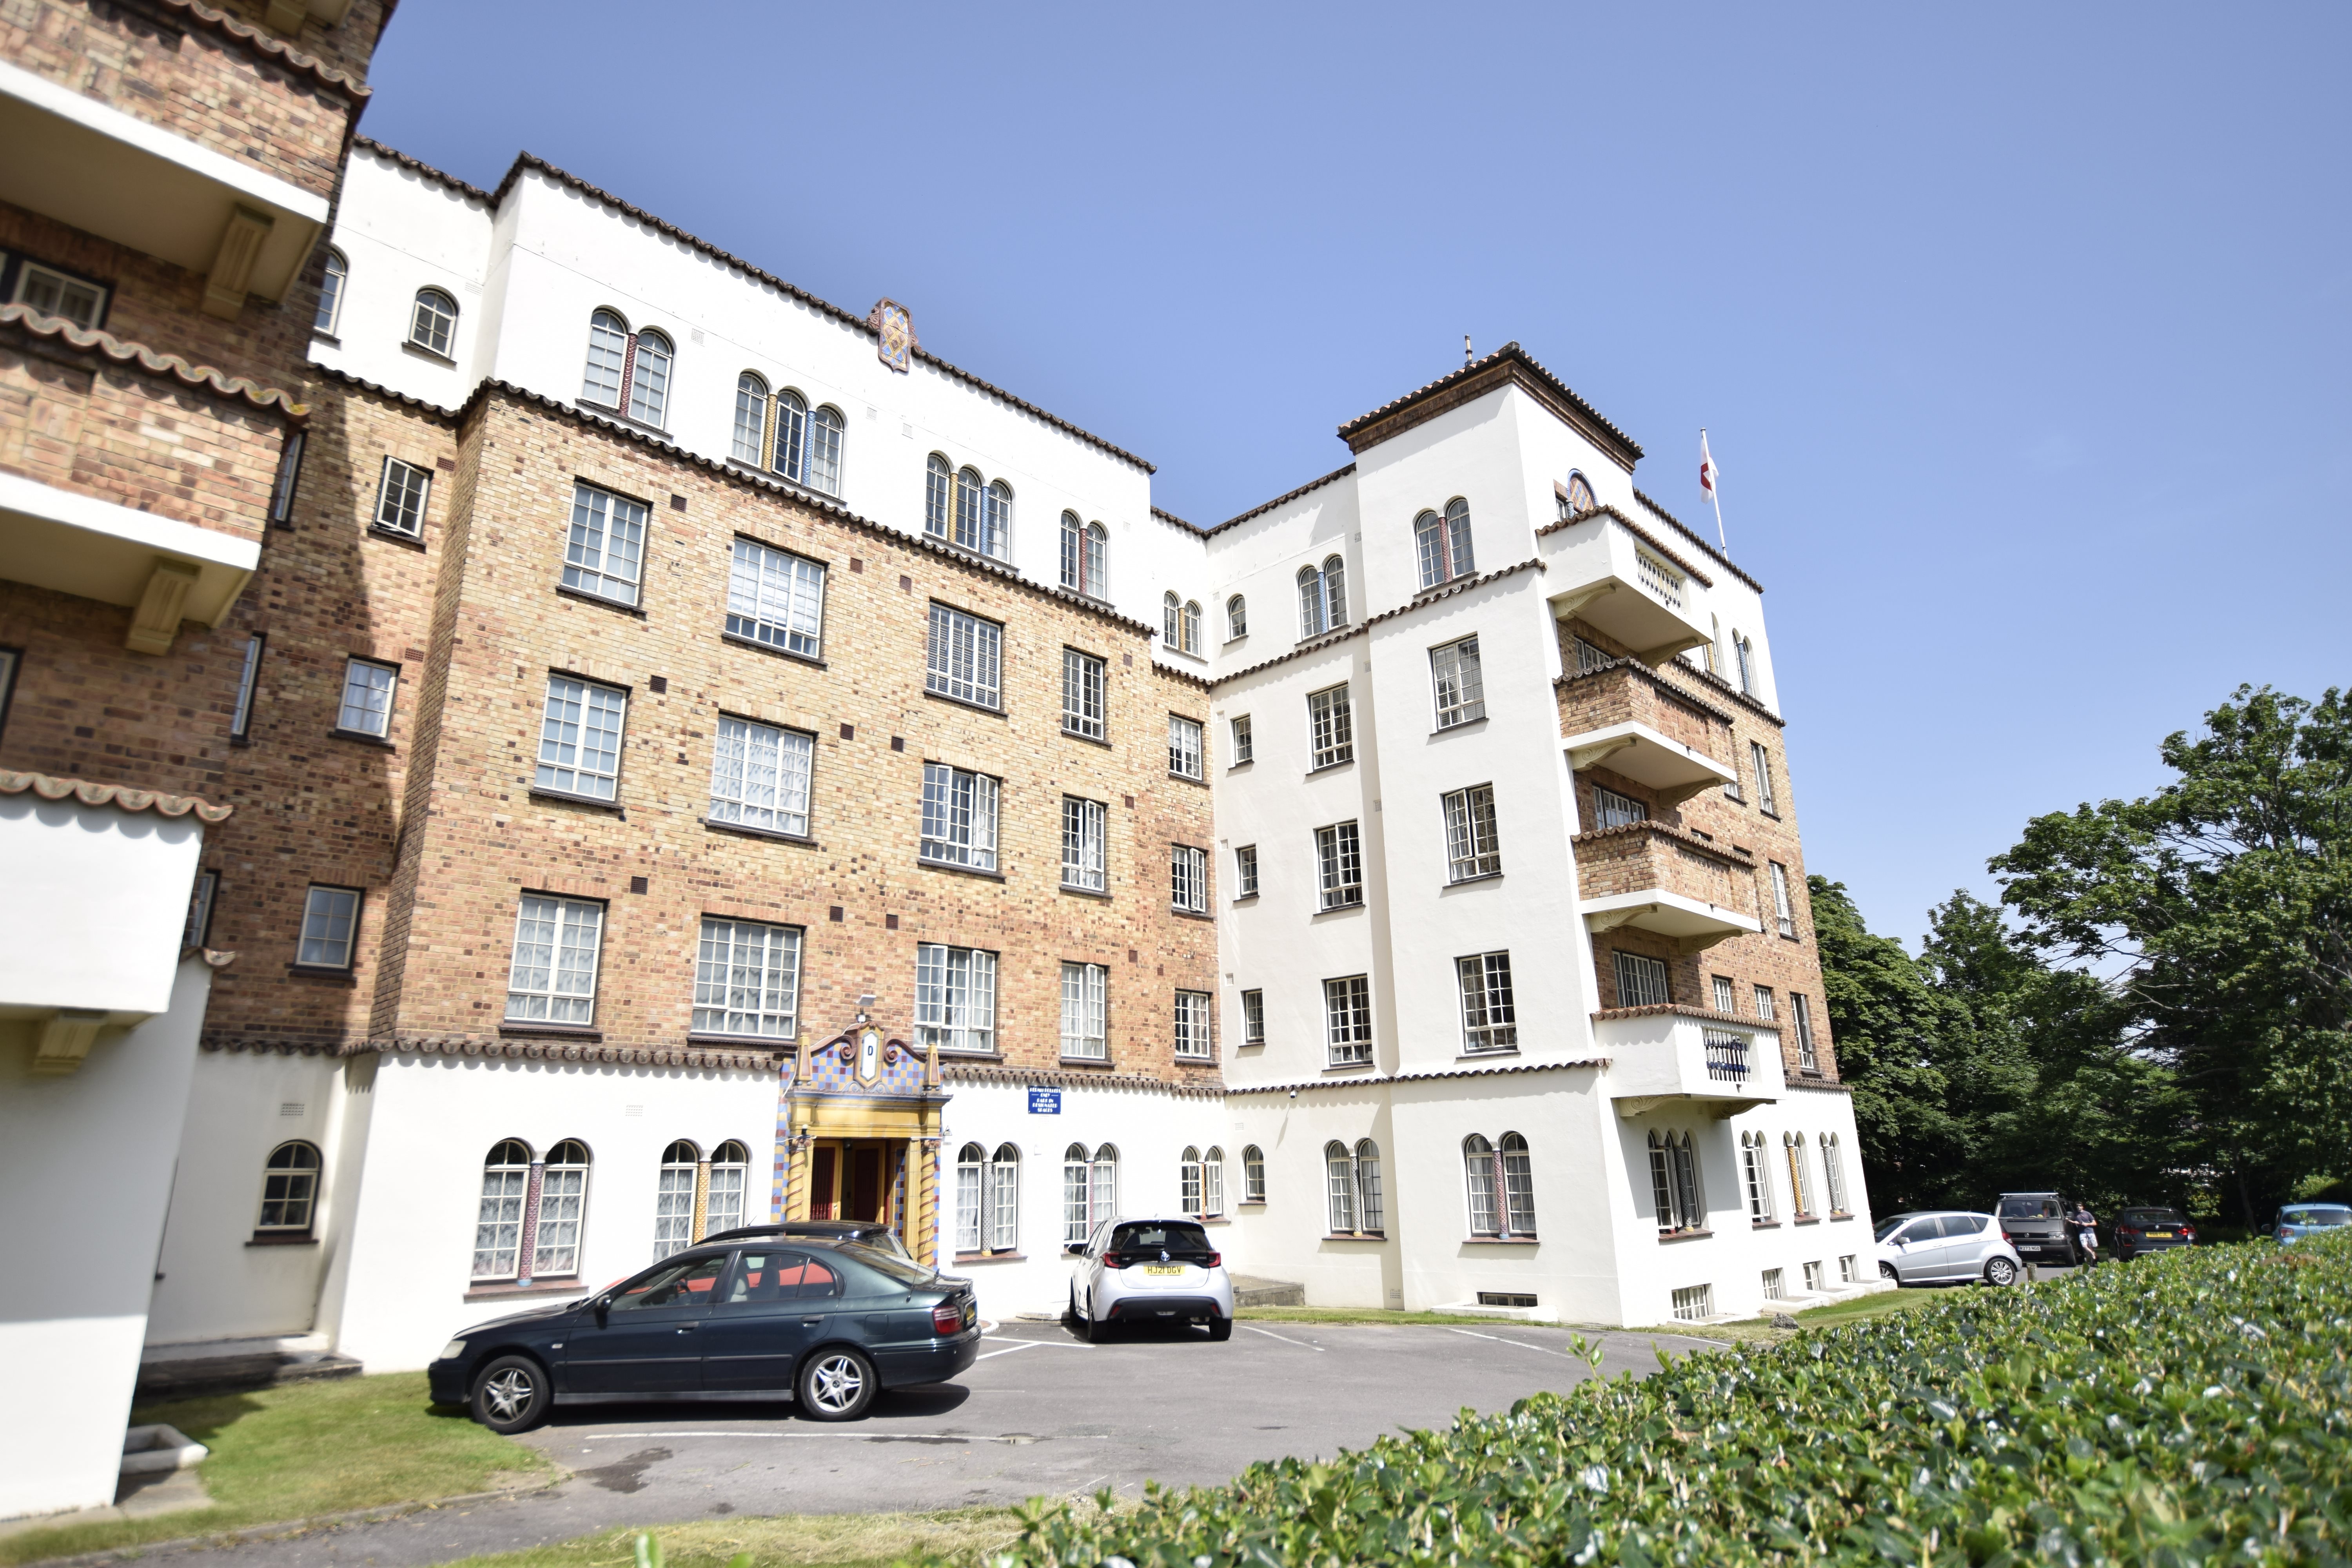 Christopher Shaw Residential is delighted to market this beautiful bright 1 bedroom apartment in the Iconic San Remo Towers development, located a short walk from Boscombe Pier. Offered with a tenant in situ until Dec 2022...